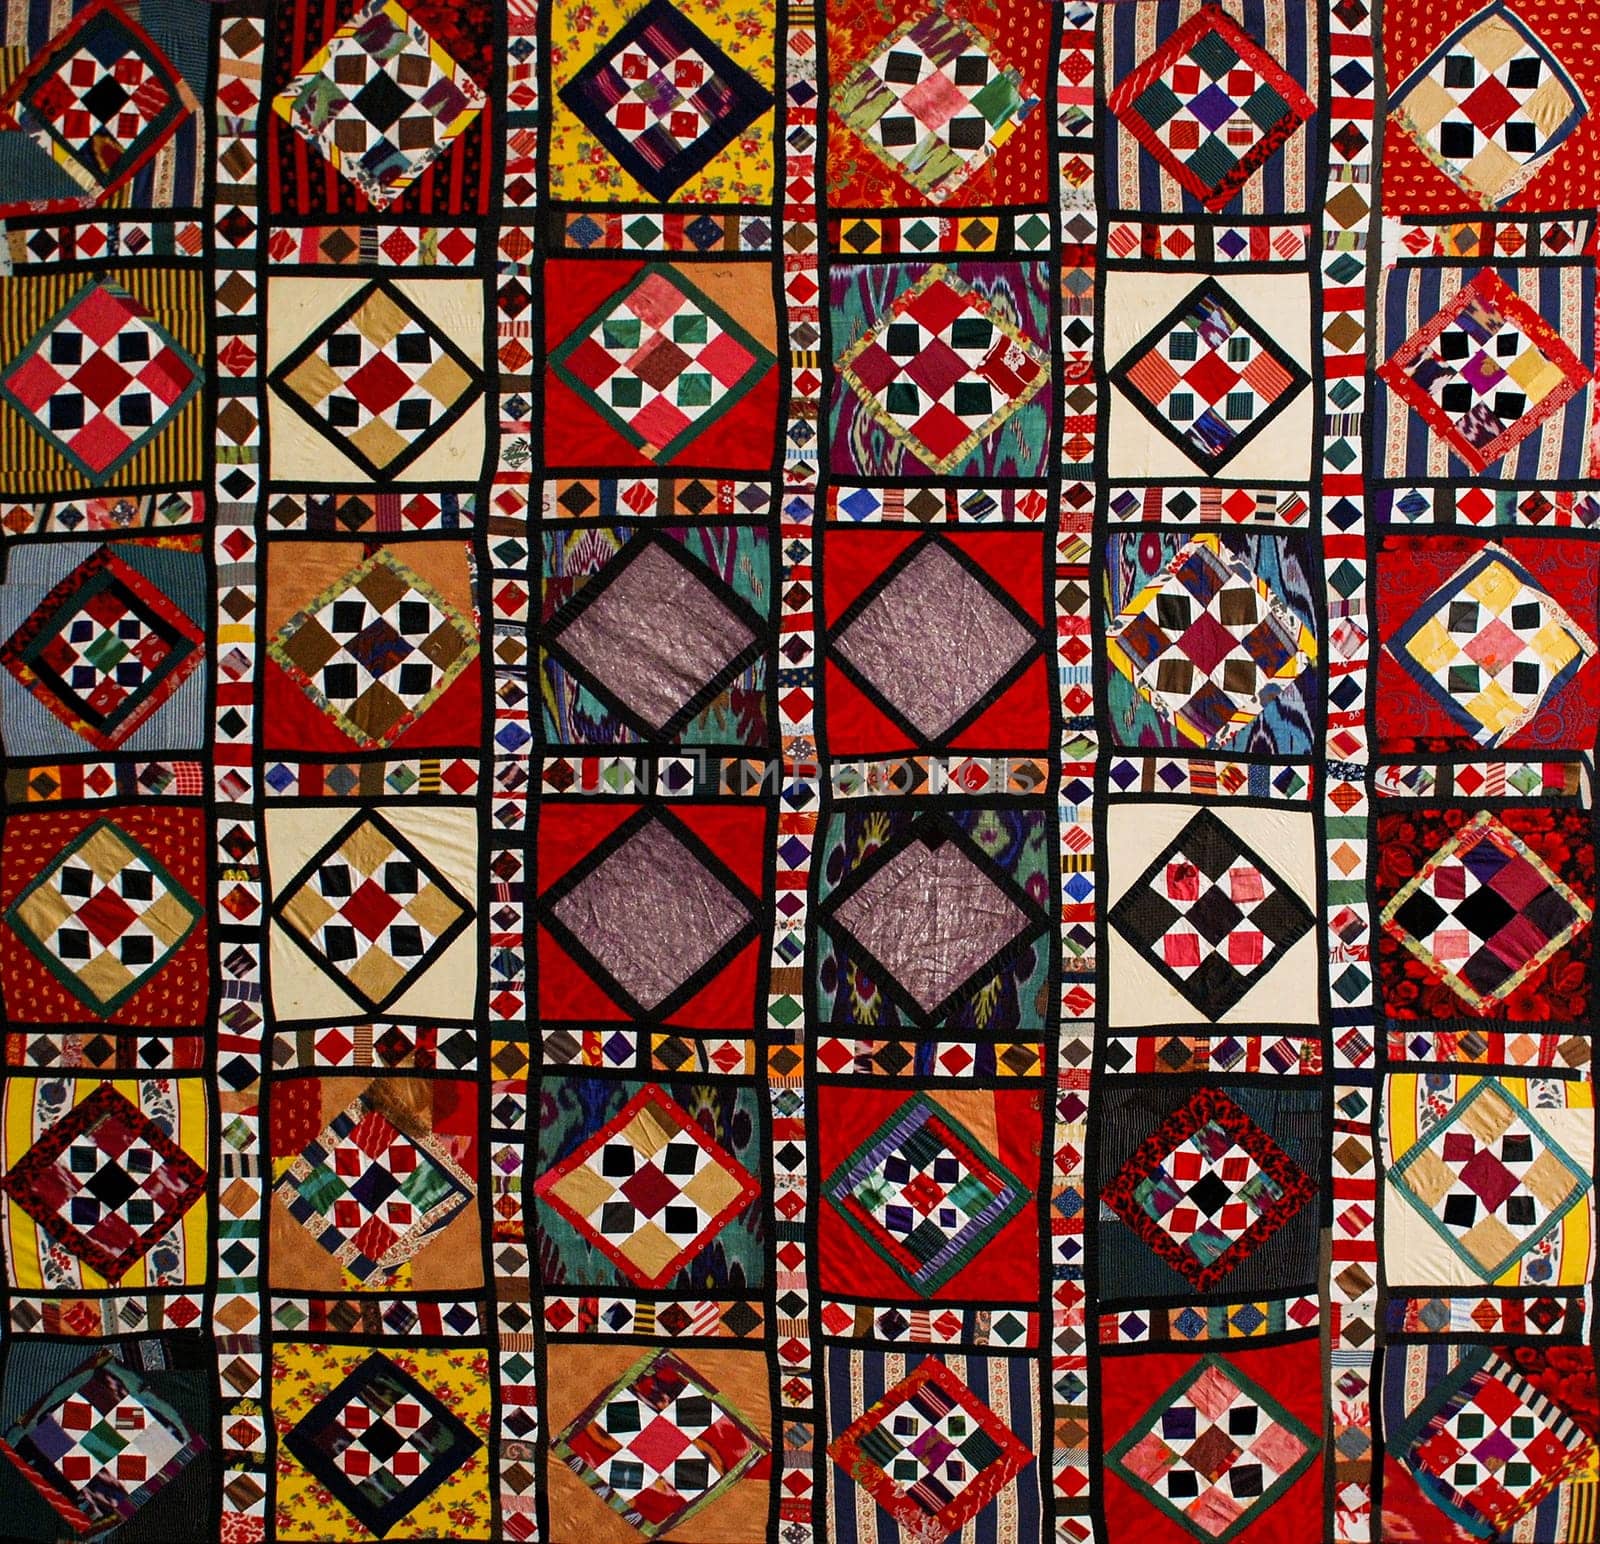 A closeup shot of national ornaments and patterns of Central Asia on fabric